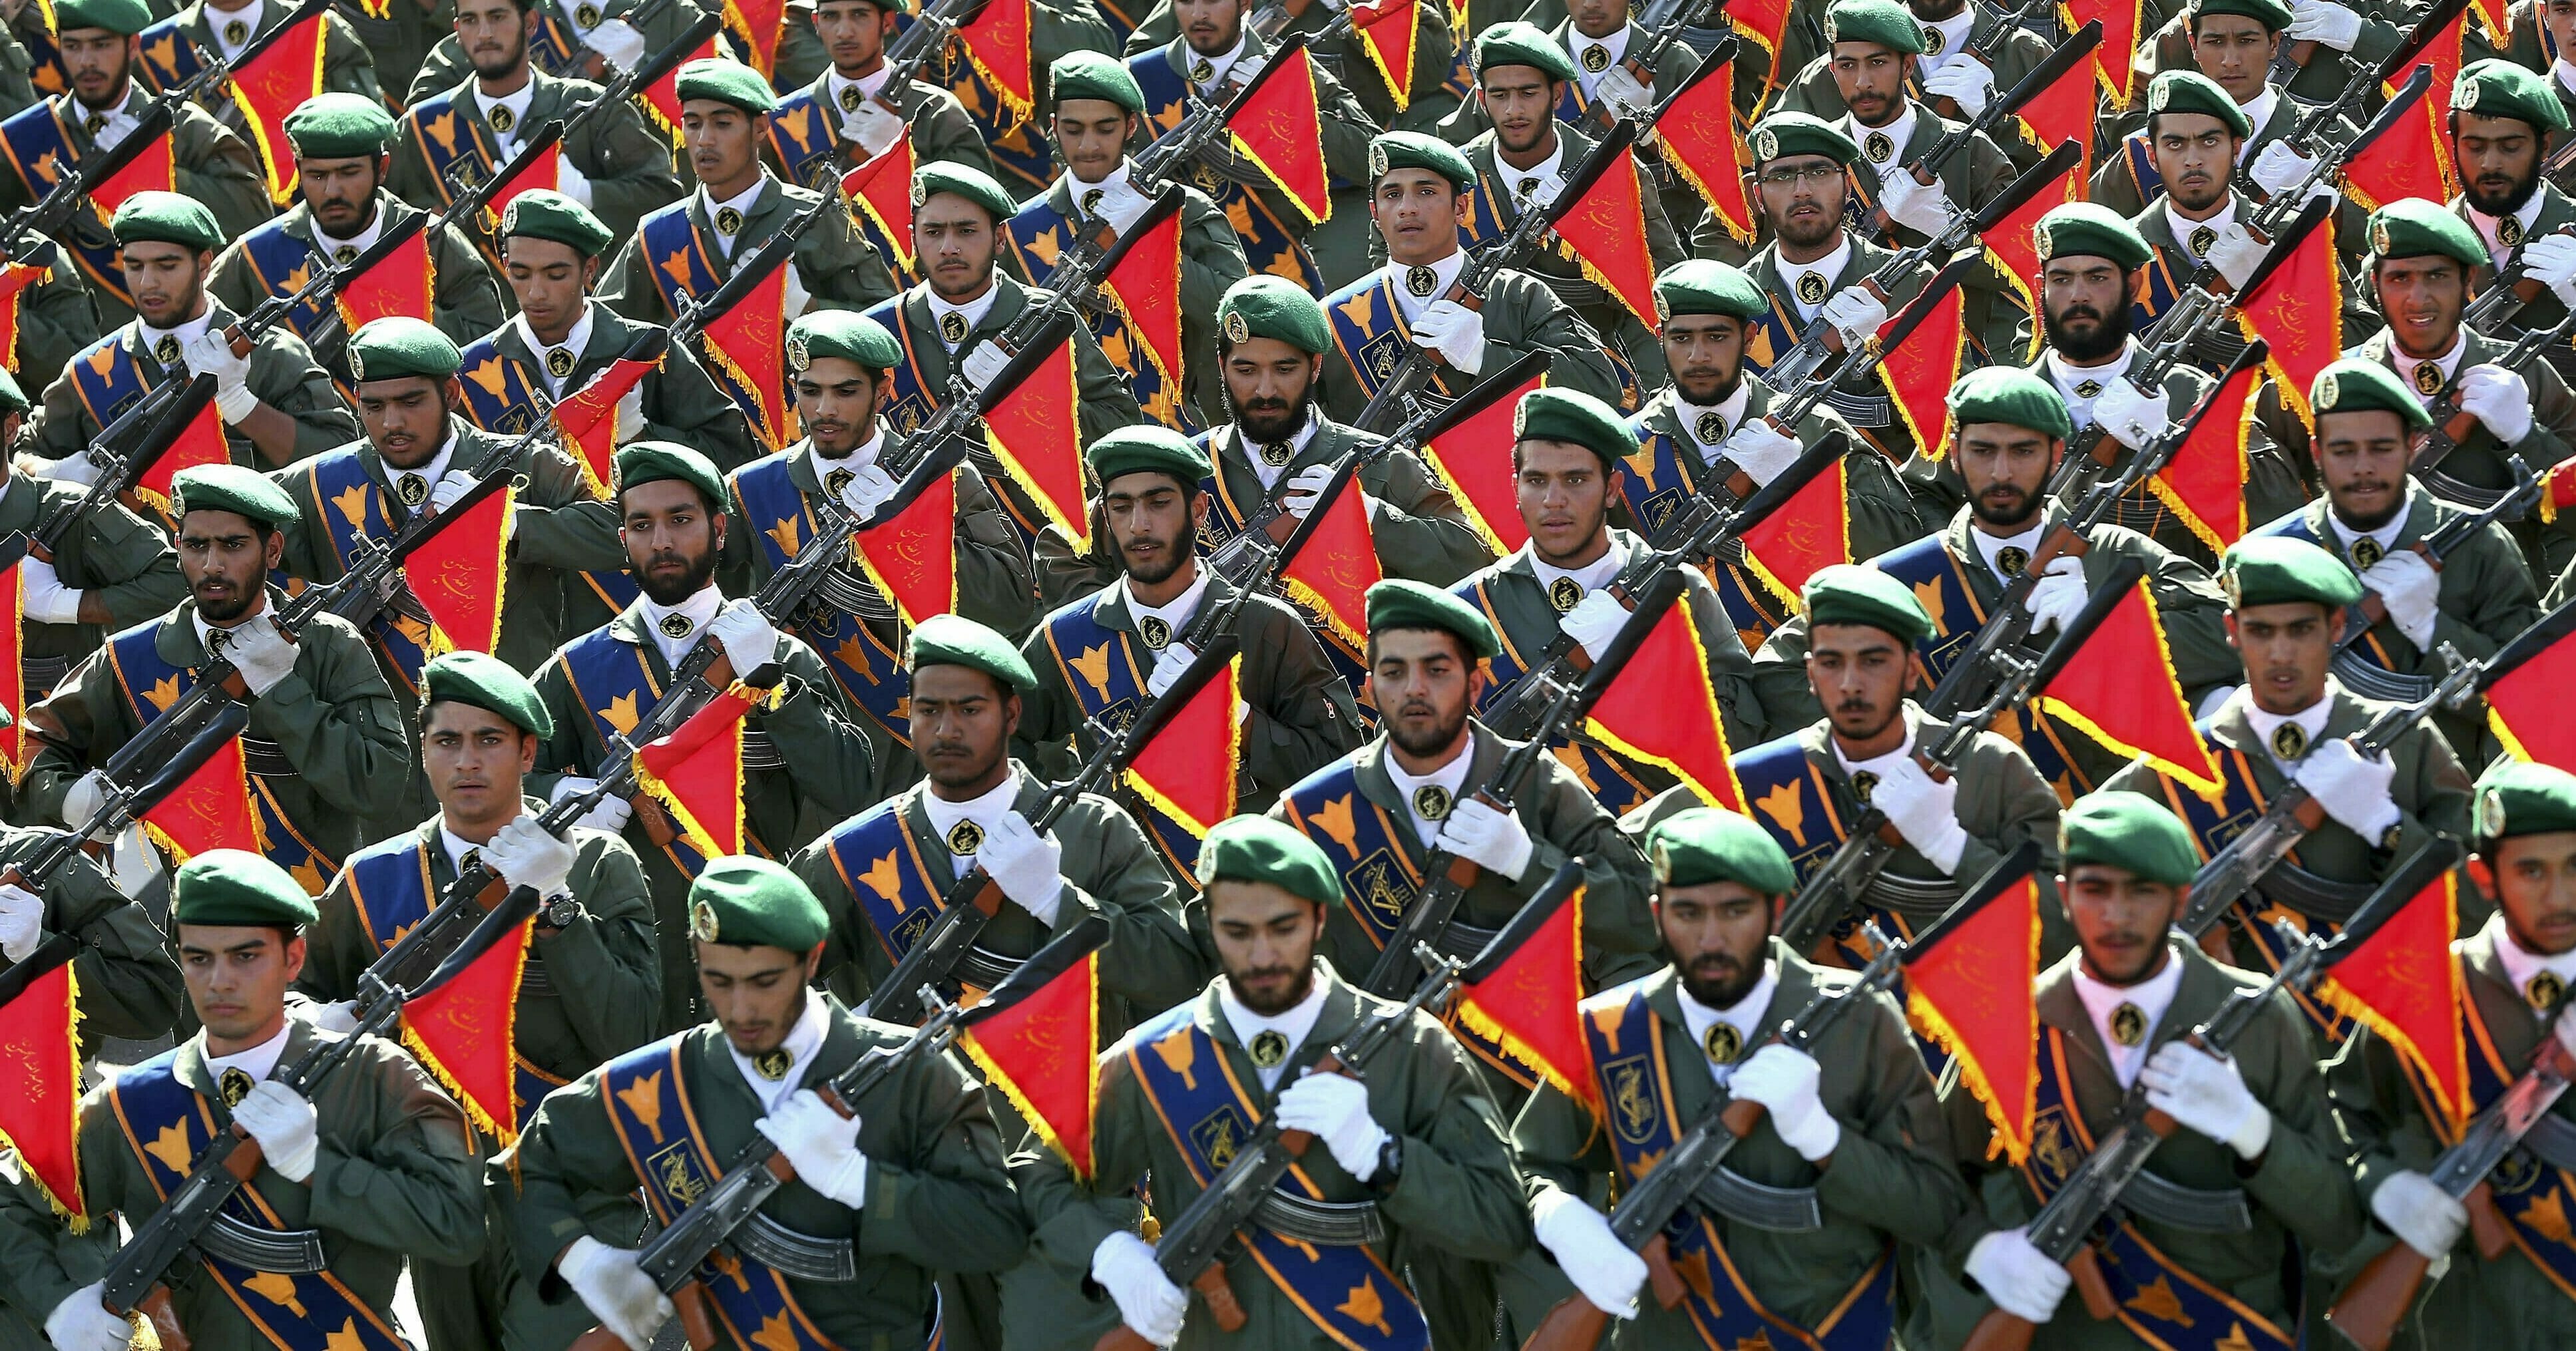 Iran's Revolutionary Guard troops march in a military parade Sept. 21, 2016, marking the 36th anniversary of Iraq's 1980 invasion of Iran.